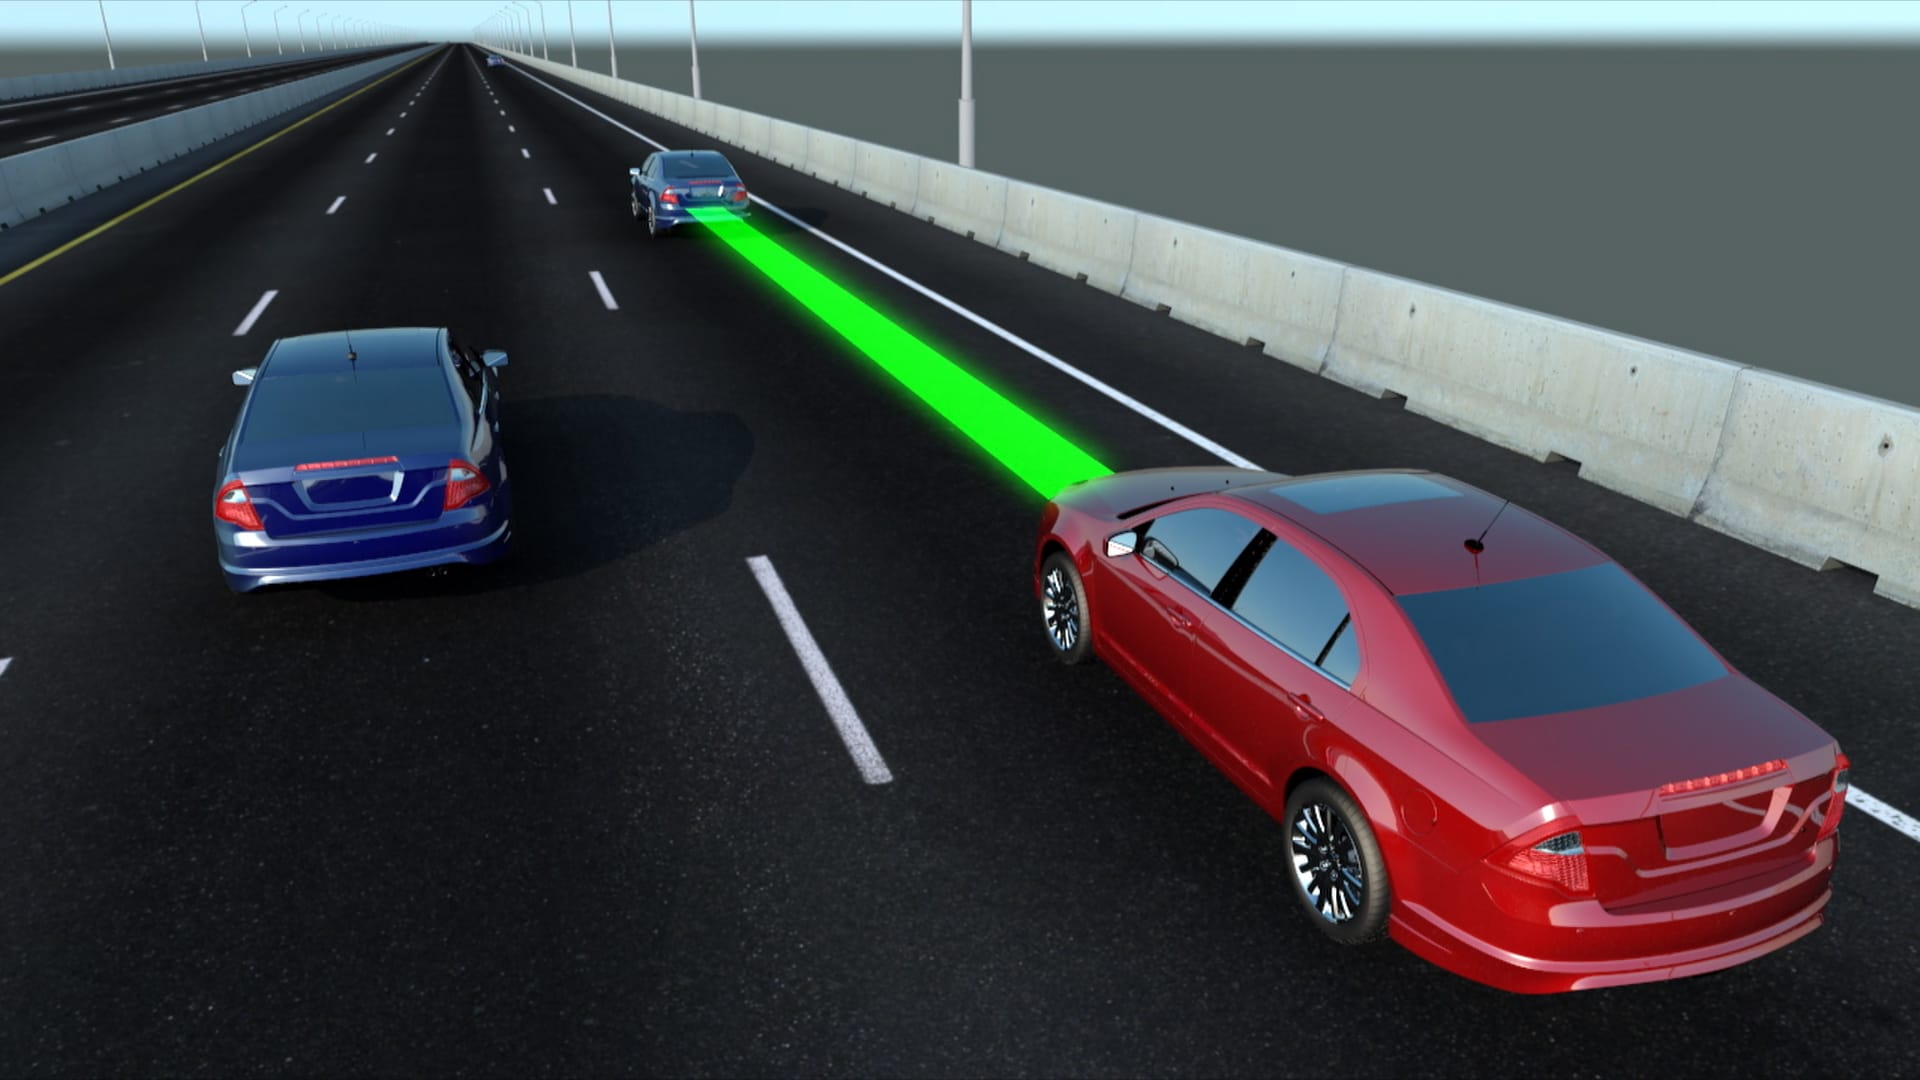 This 2015 image provided by the Insurance Institute for Highway Safety shows an illustration of an automobile's adaptive cruise control on the road. A recent survey showed many U.S. drivers lack awareness and understanding of new safety features such as this one.